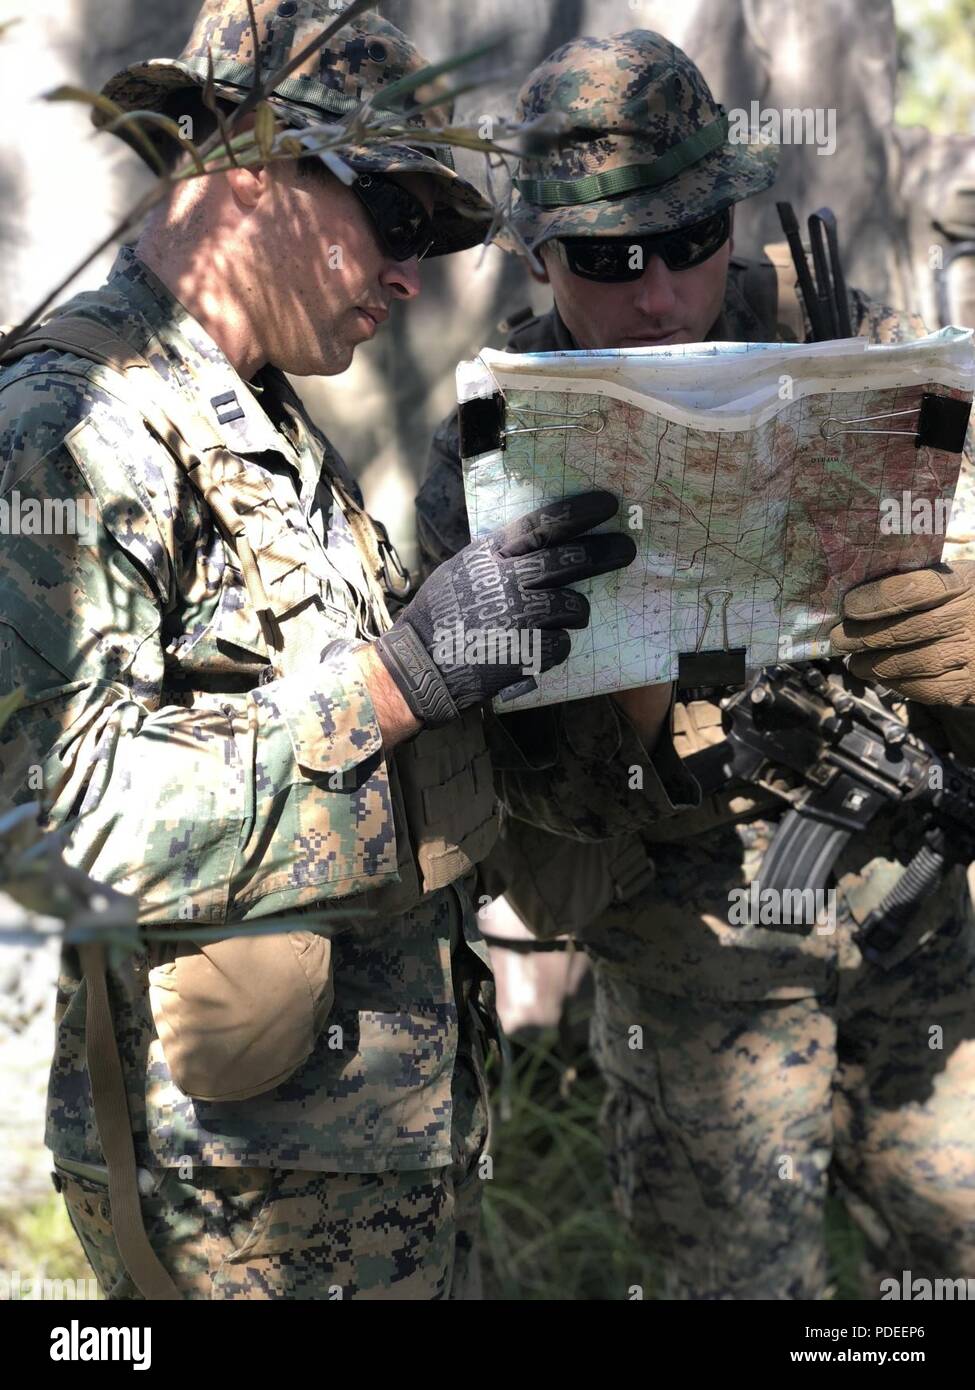 U.S. Marines Corps Capt. Vince Margiotta, Commanding Officer and GySgt David Mcfadden, Company Gunnery Sergeant of Company F look at a map to ensure they are puting their company in the best positions for Ex-Warfighter during Marine Rotational Force-Darwin (MRF-D) on Shoal Water Bay Training Area, Australia May 16, 2018. MRF-D was established by former U.S. President Barack Obama and former Australian Prime Minister Julia Gillard in 2011 to build and strengthen partnerships in the Pacific region. Approximately 1,500 Marines are scheduled to participate in training events around the country. Stock Photo